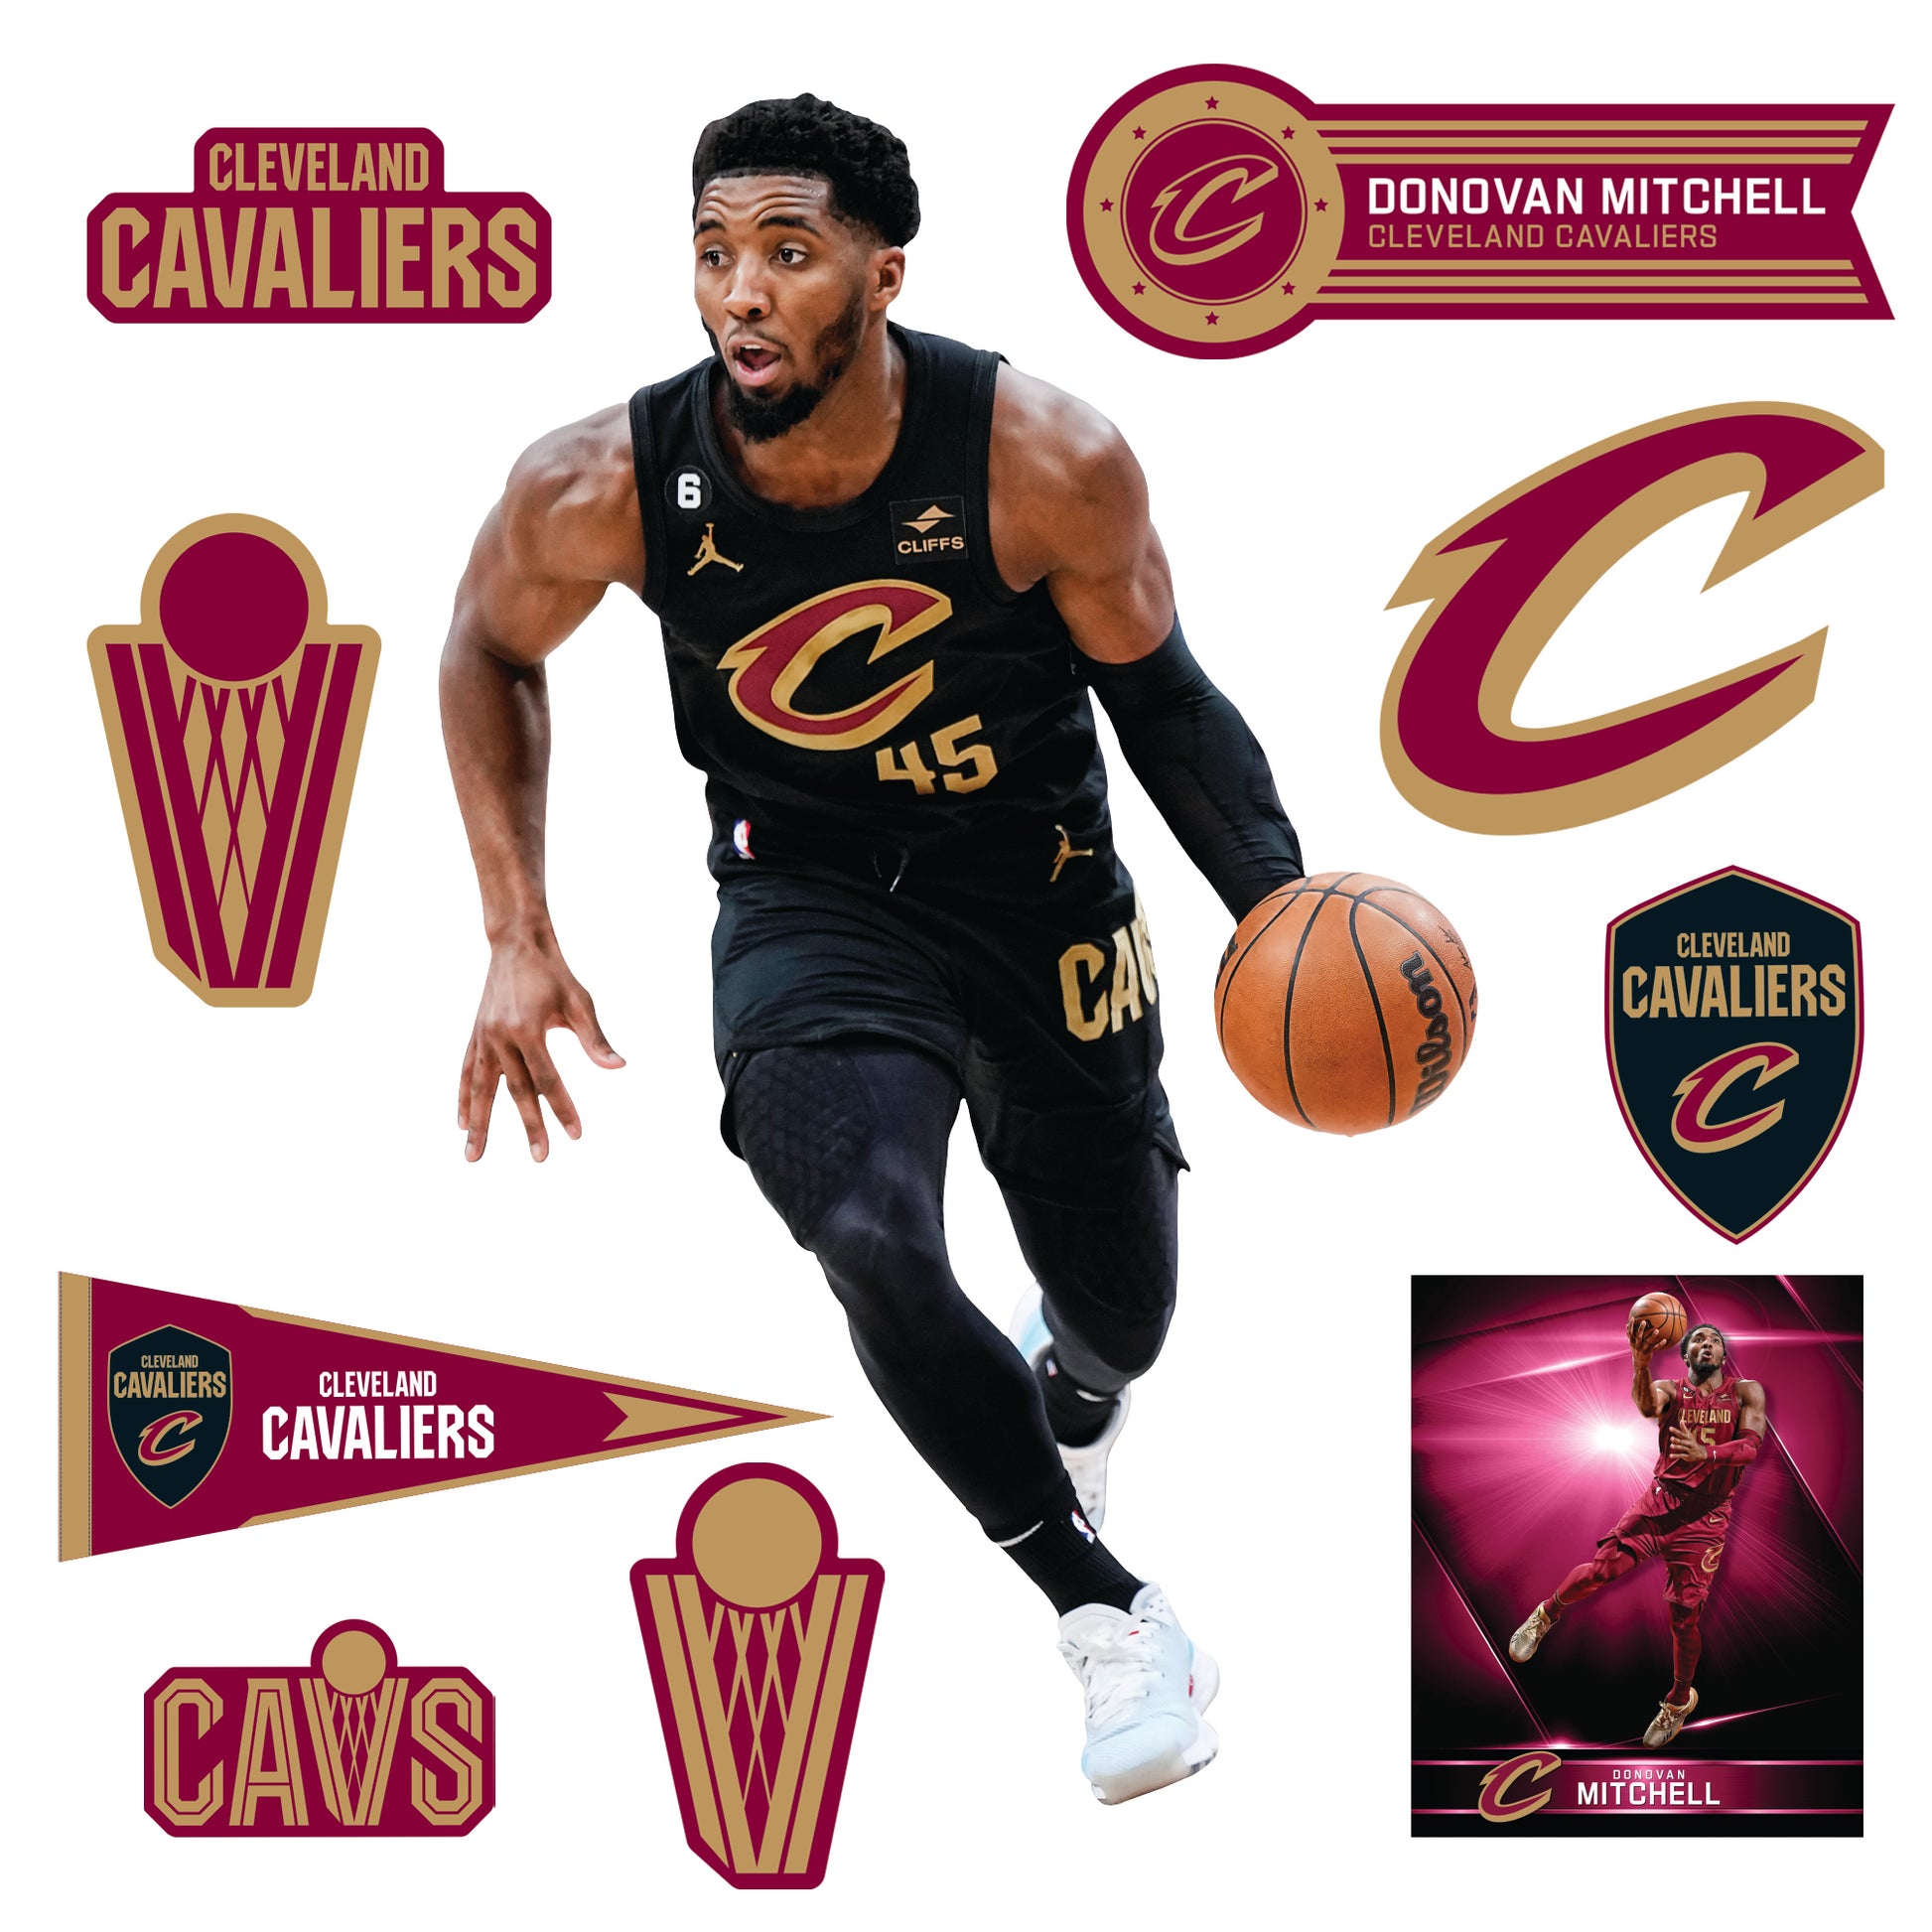 Donovan Mitchell Cleveland Cavaliers Framed 5 x 7 Jersey Swap Collage